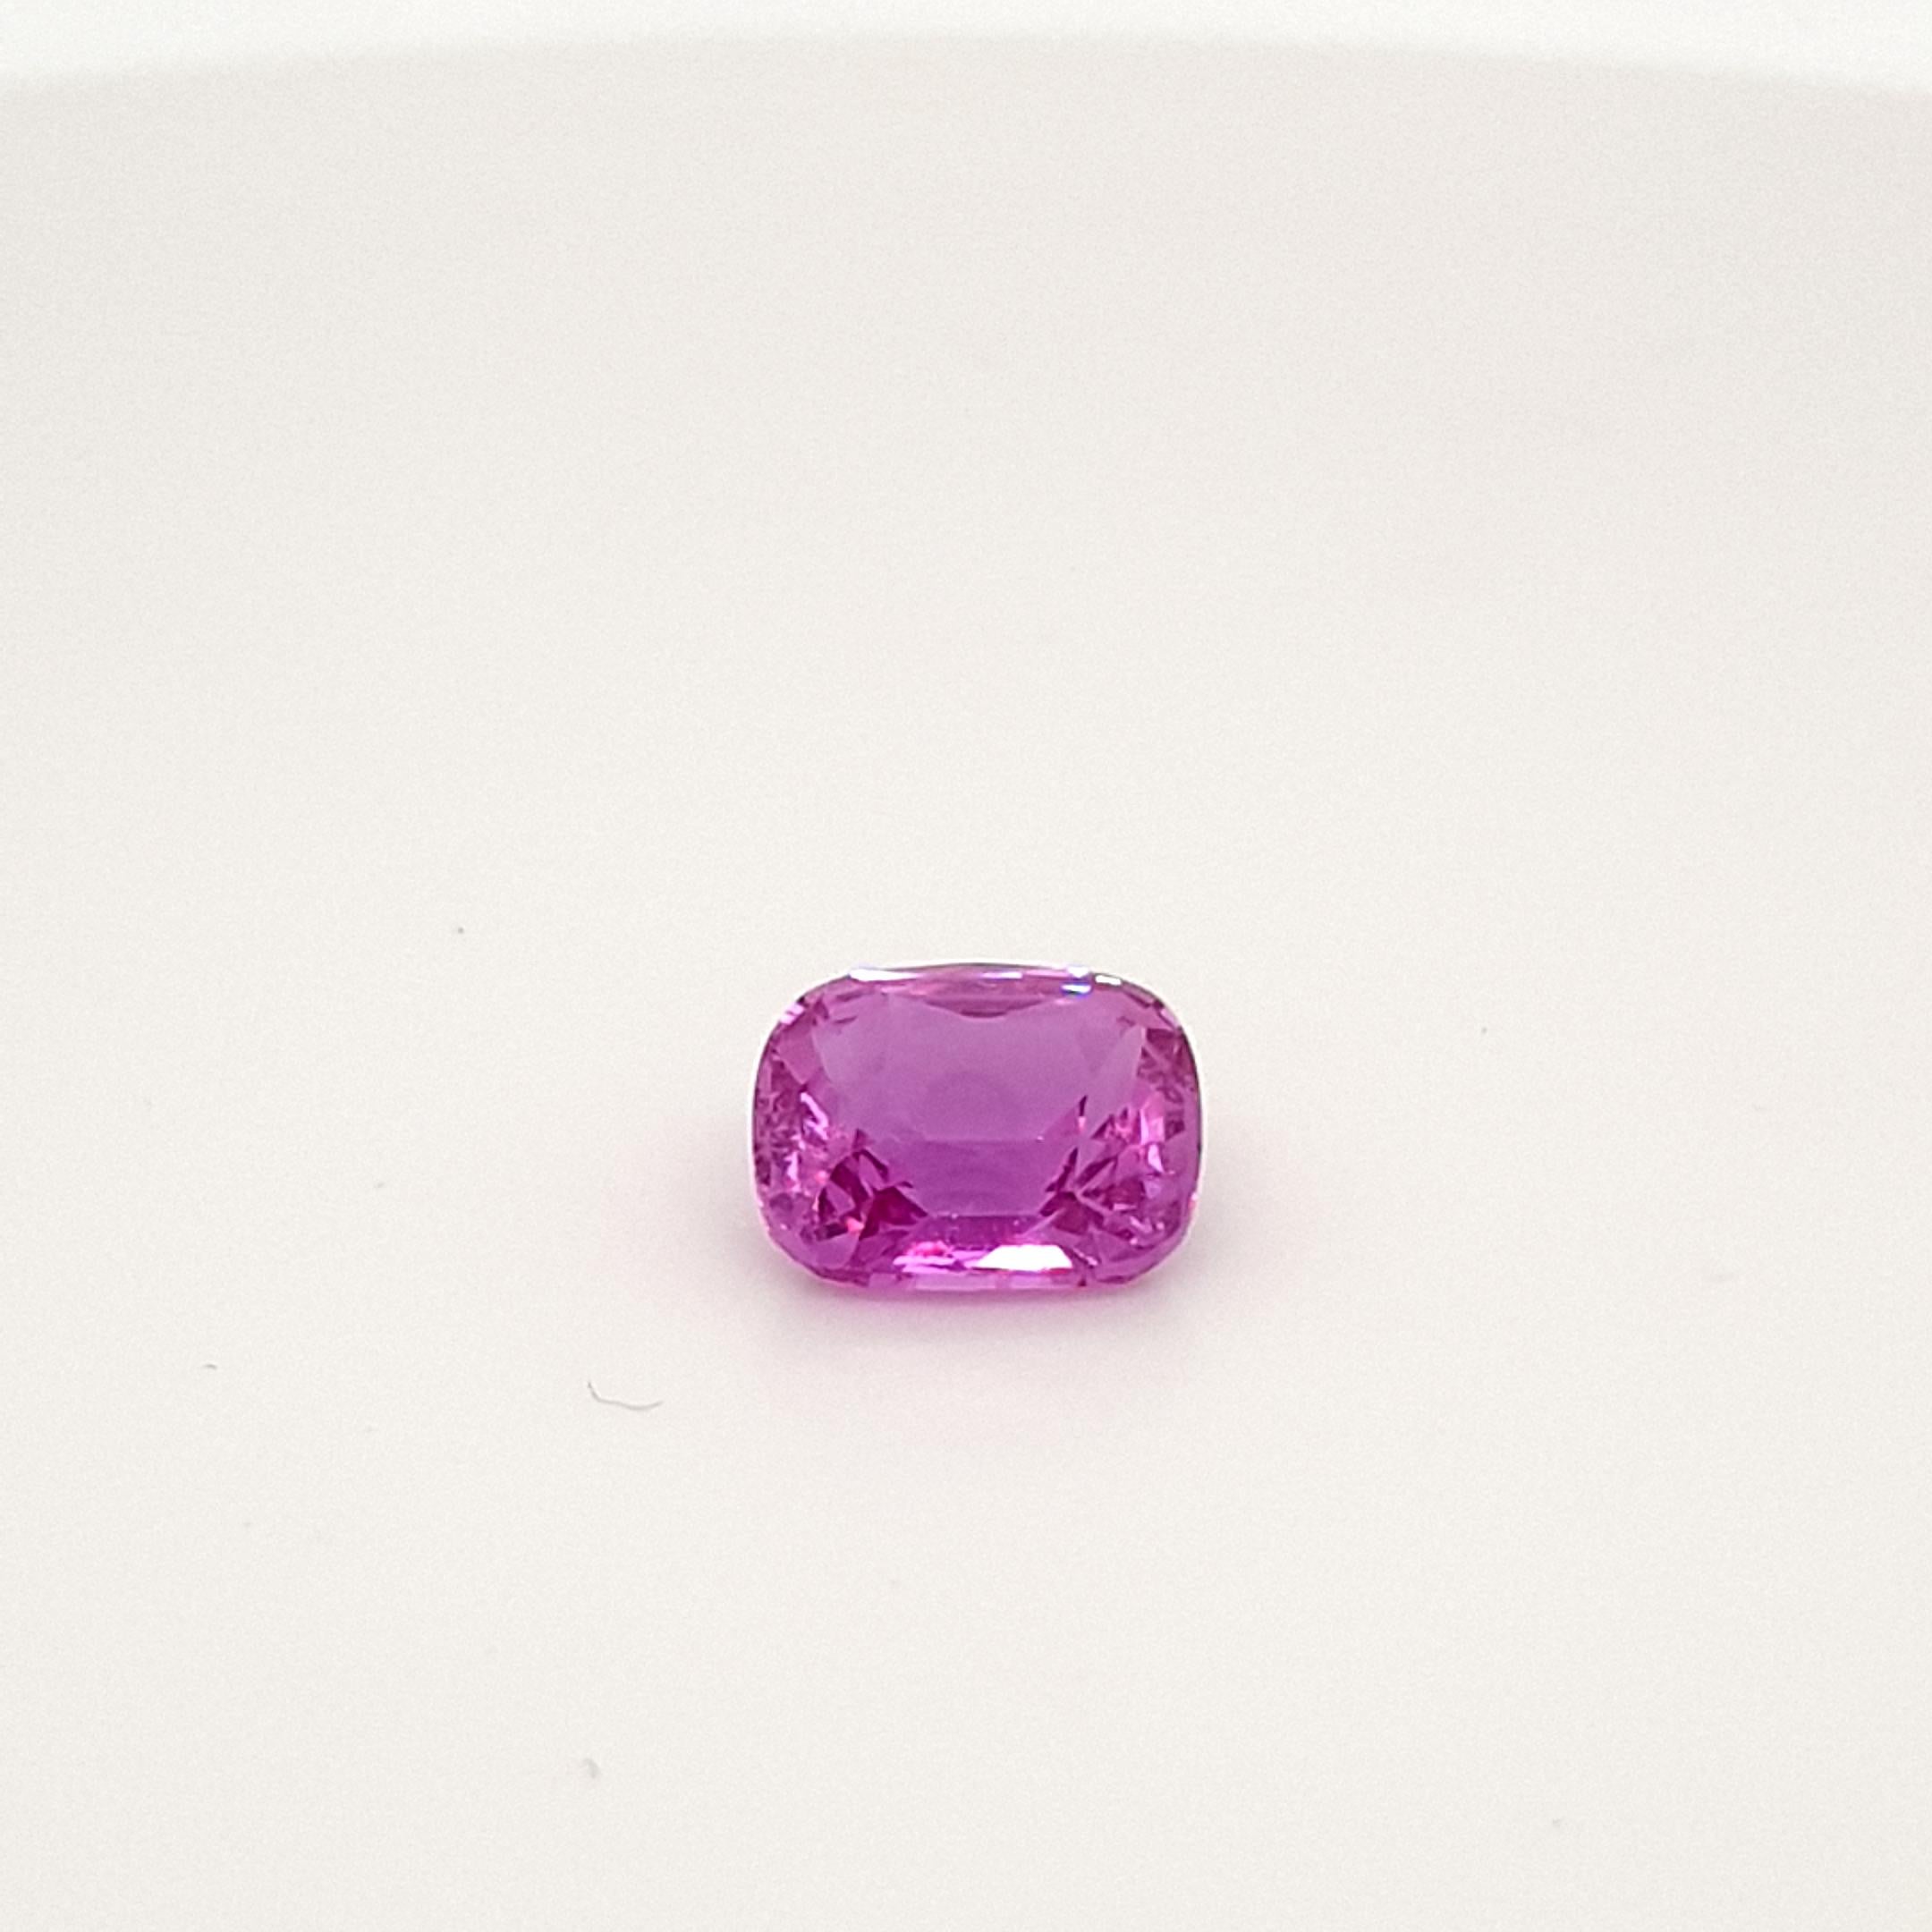 Contemporary Pink Violet Sapphire, Faceted Gem, 3, 04 Ct., Loose Gemstone, no treatments For Sale